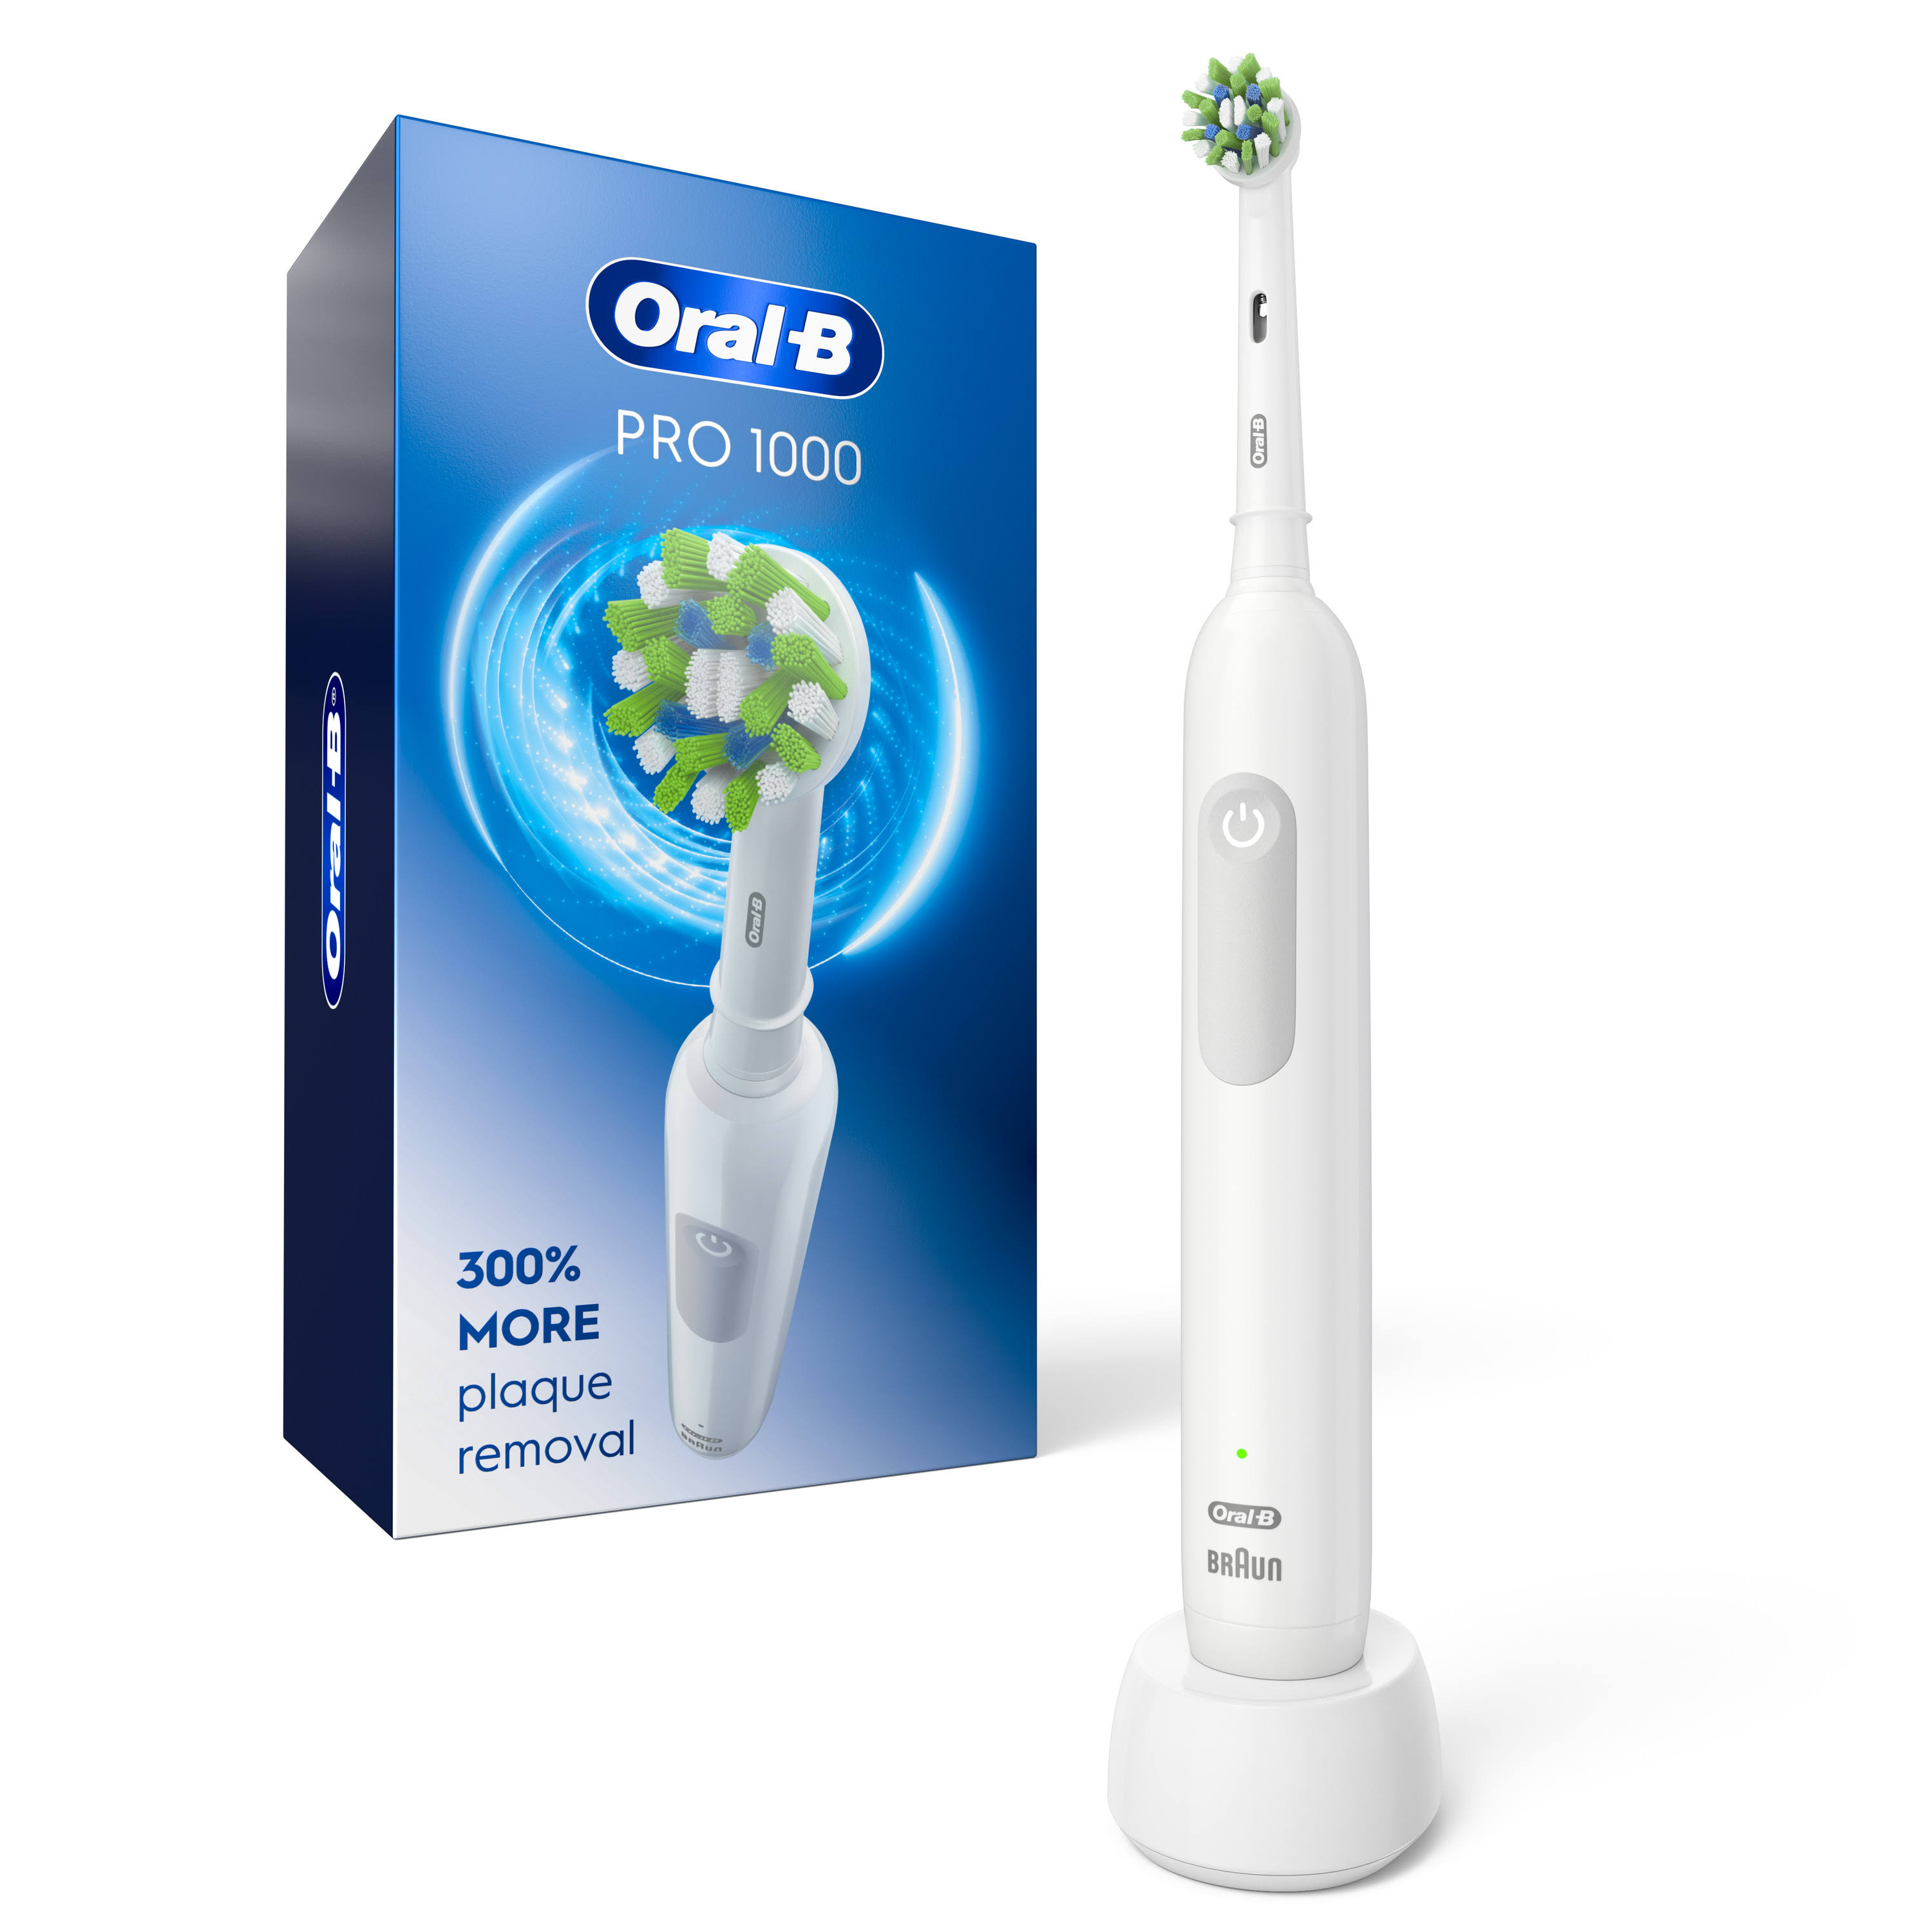 Oral B Pro 1000 Electric Rechargeable Power Toothbrush